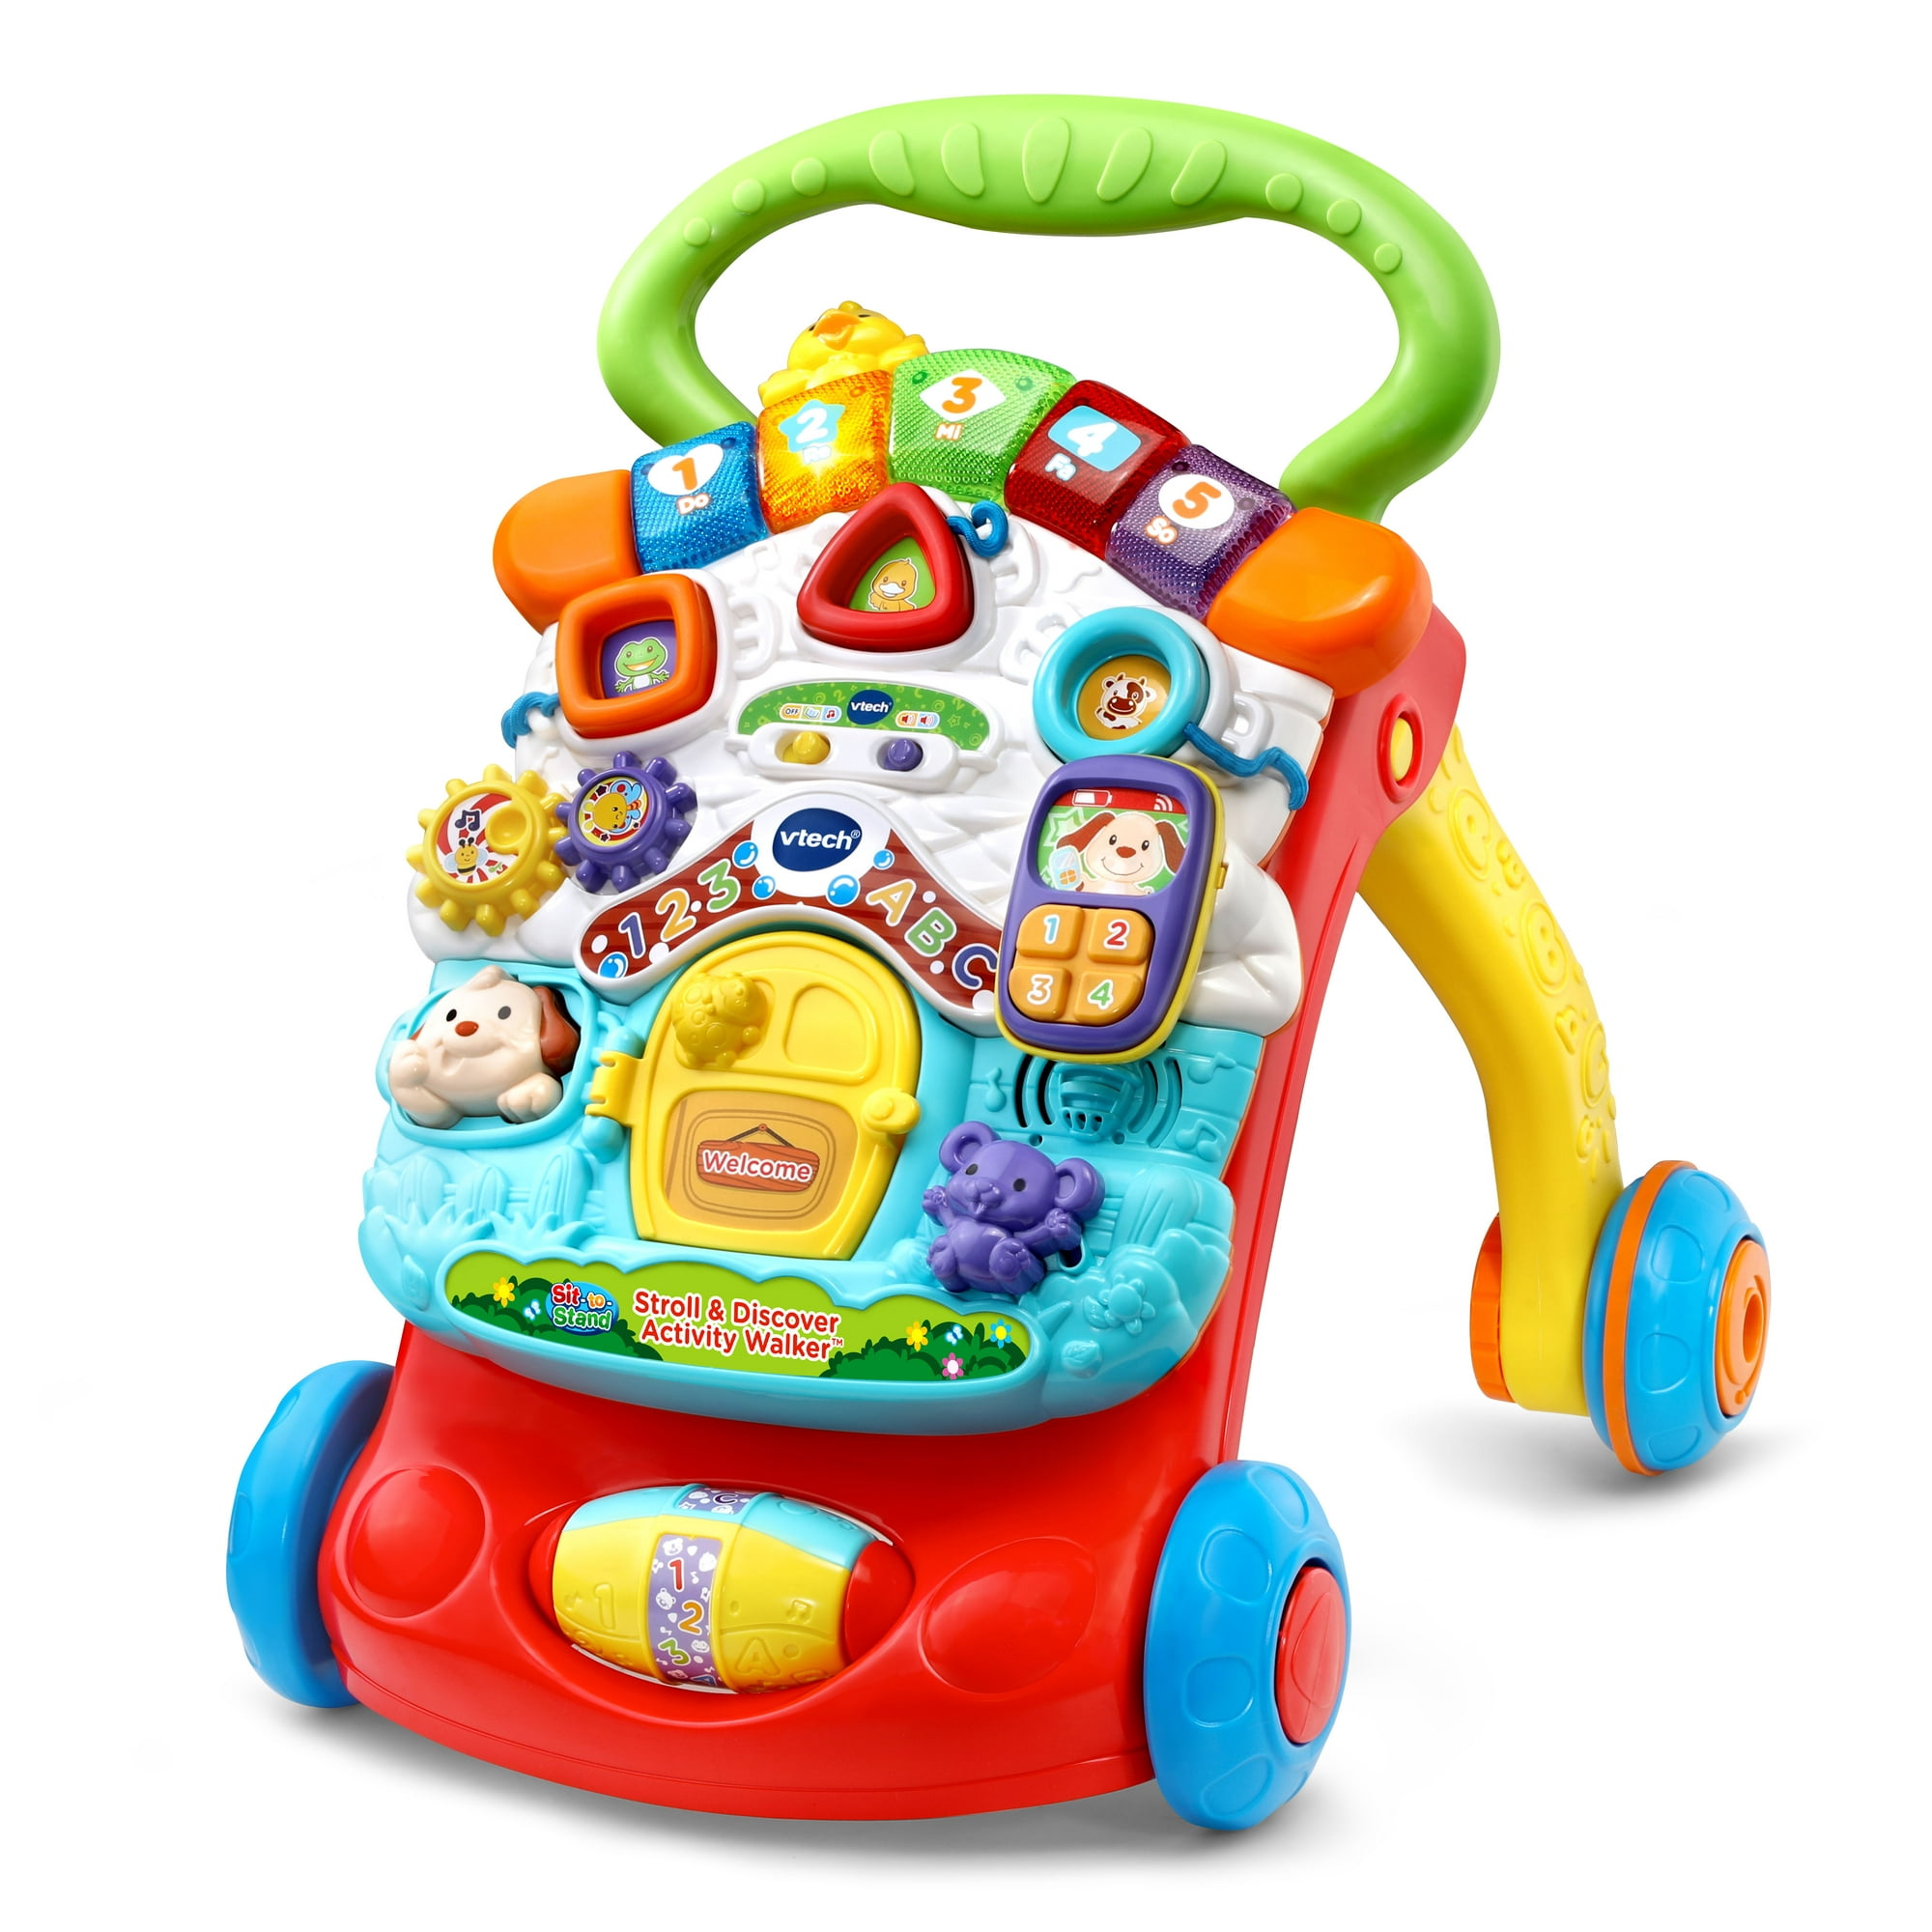 VTech Stroll & Discover Activity Walker 2 -in-1 Unisex Toddler Toy